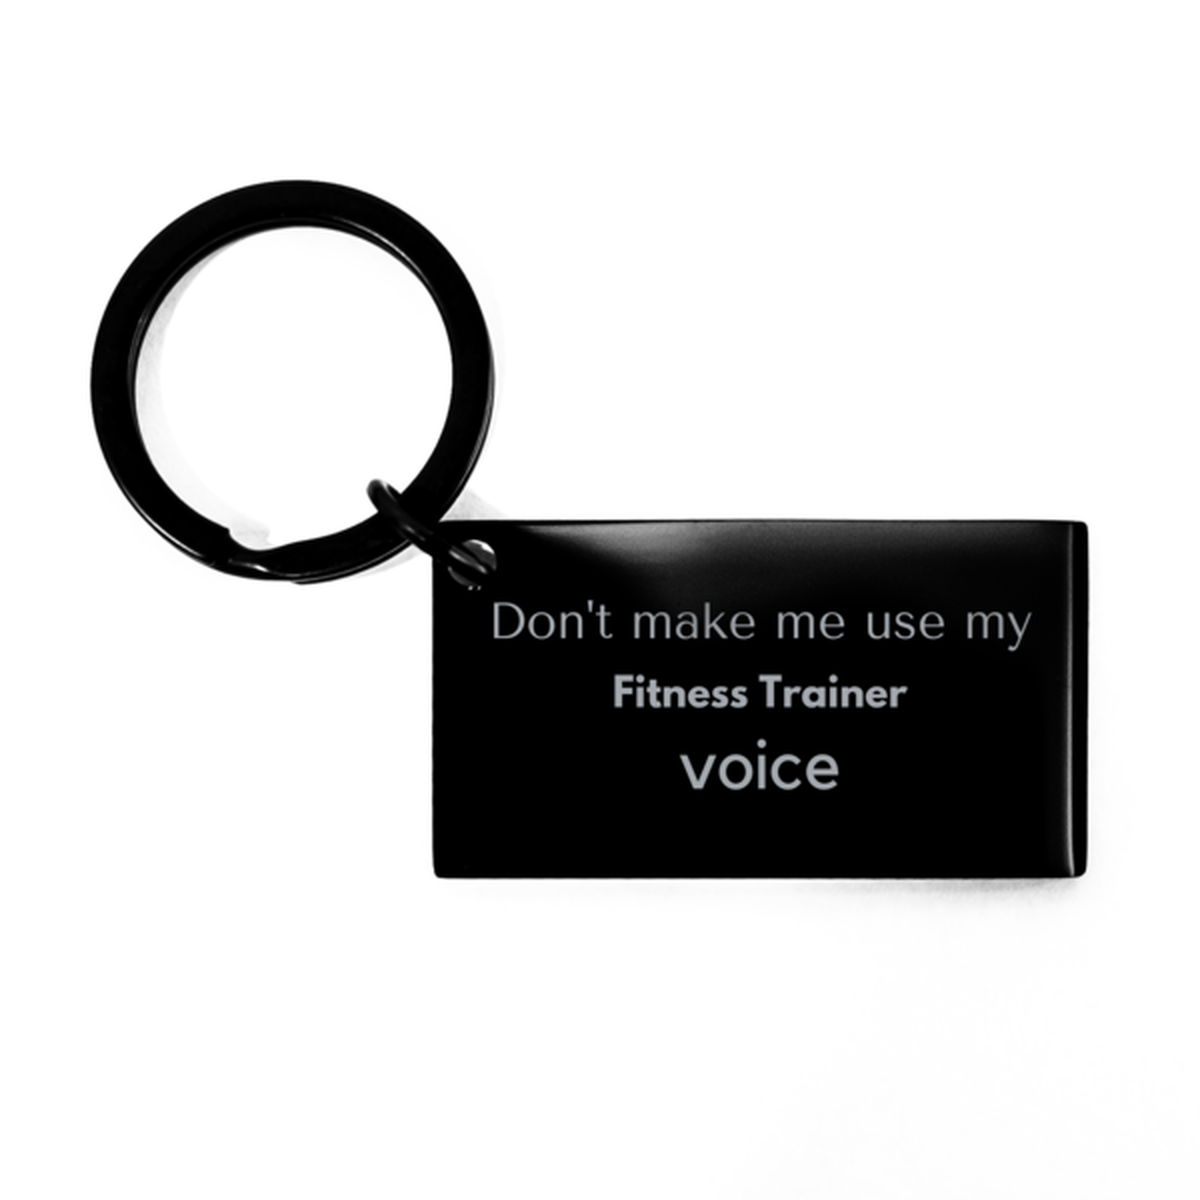 Don't make me use my Fitness Trainer voice, Sarcasm Fitness Trainer Gifts, Christmas Fitness Trainer Keychain Birthday Unique Gifts For Fitness Trainer Coworkers, Men, Women, Colleague, Friends